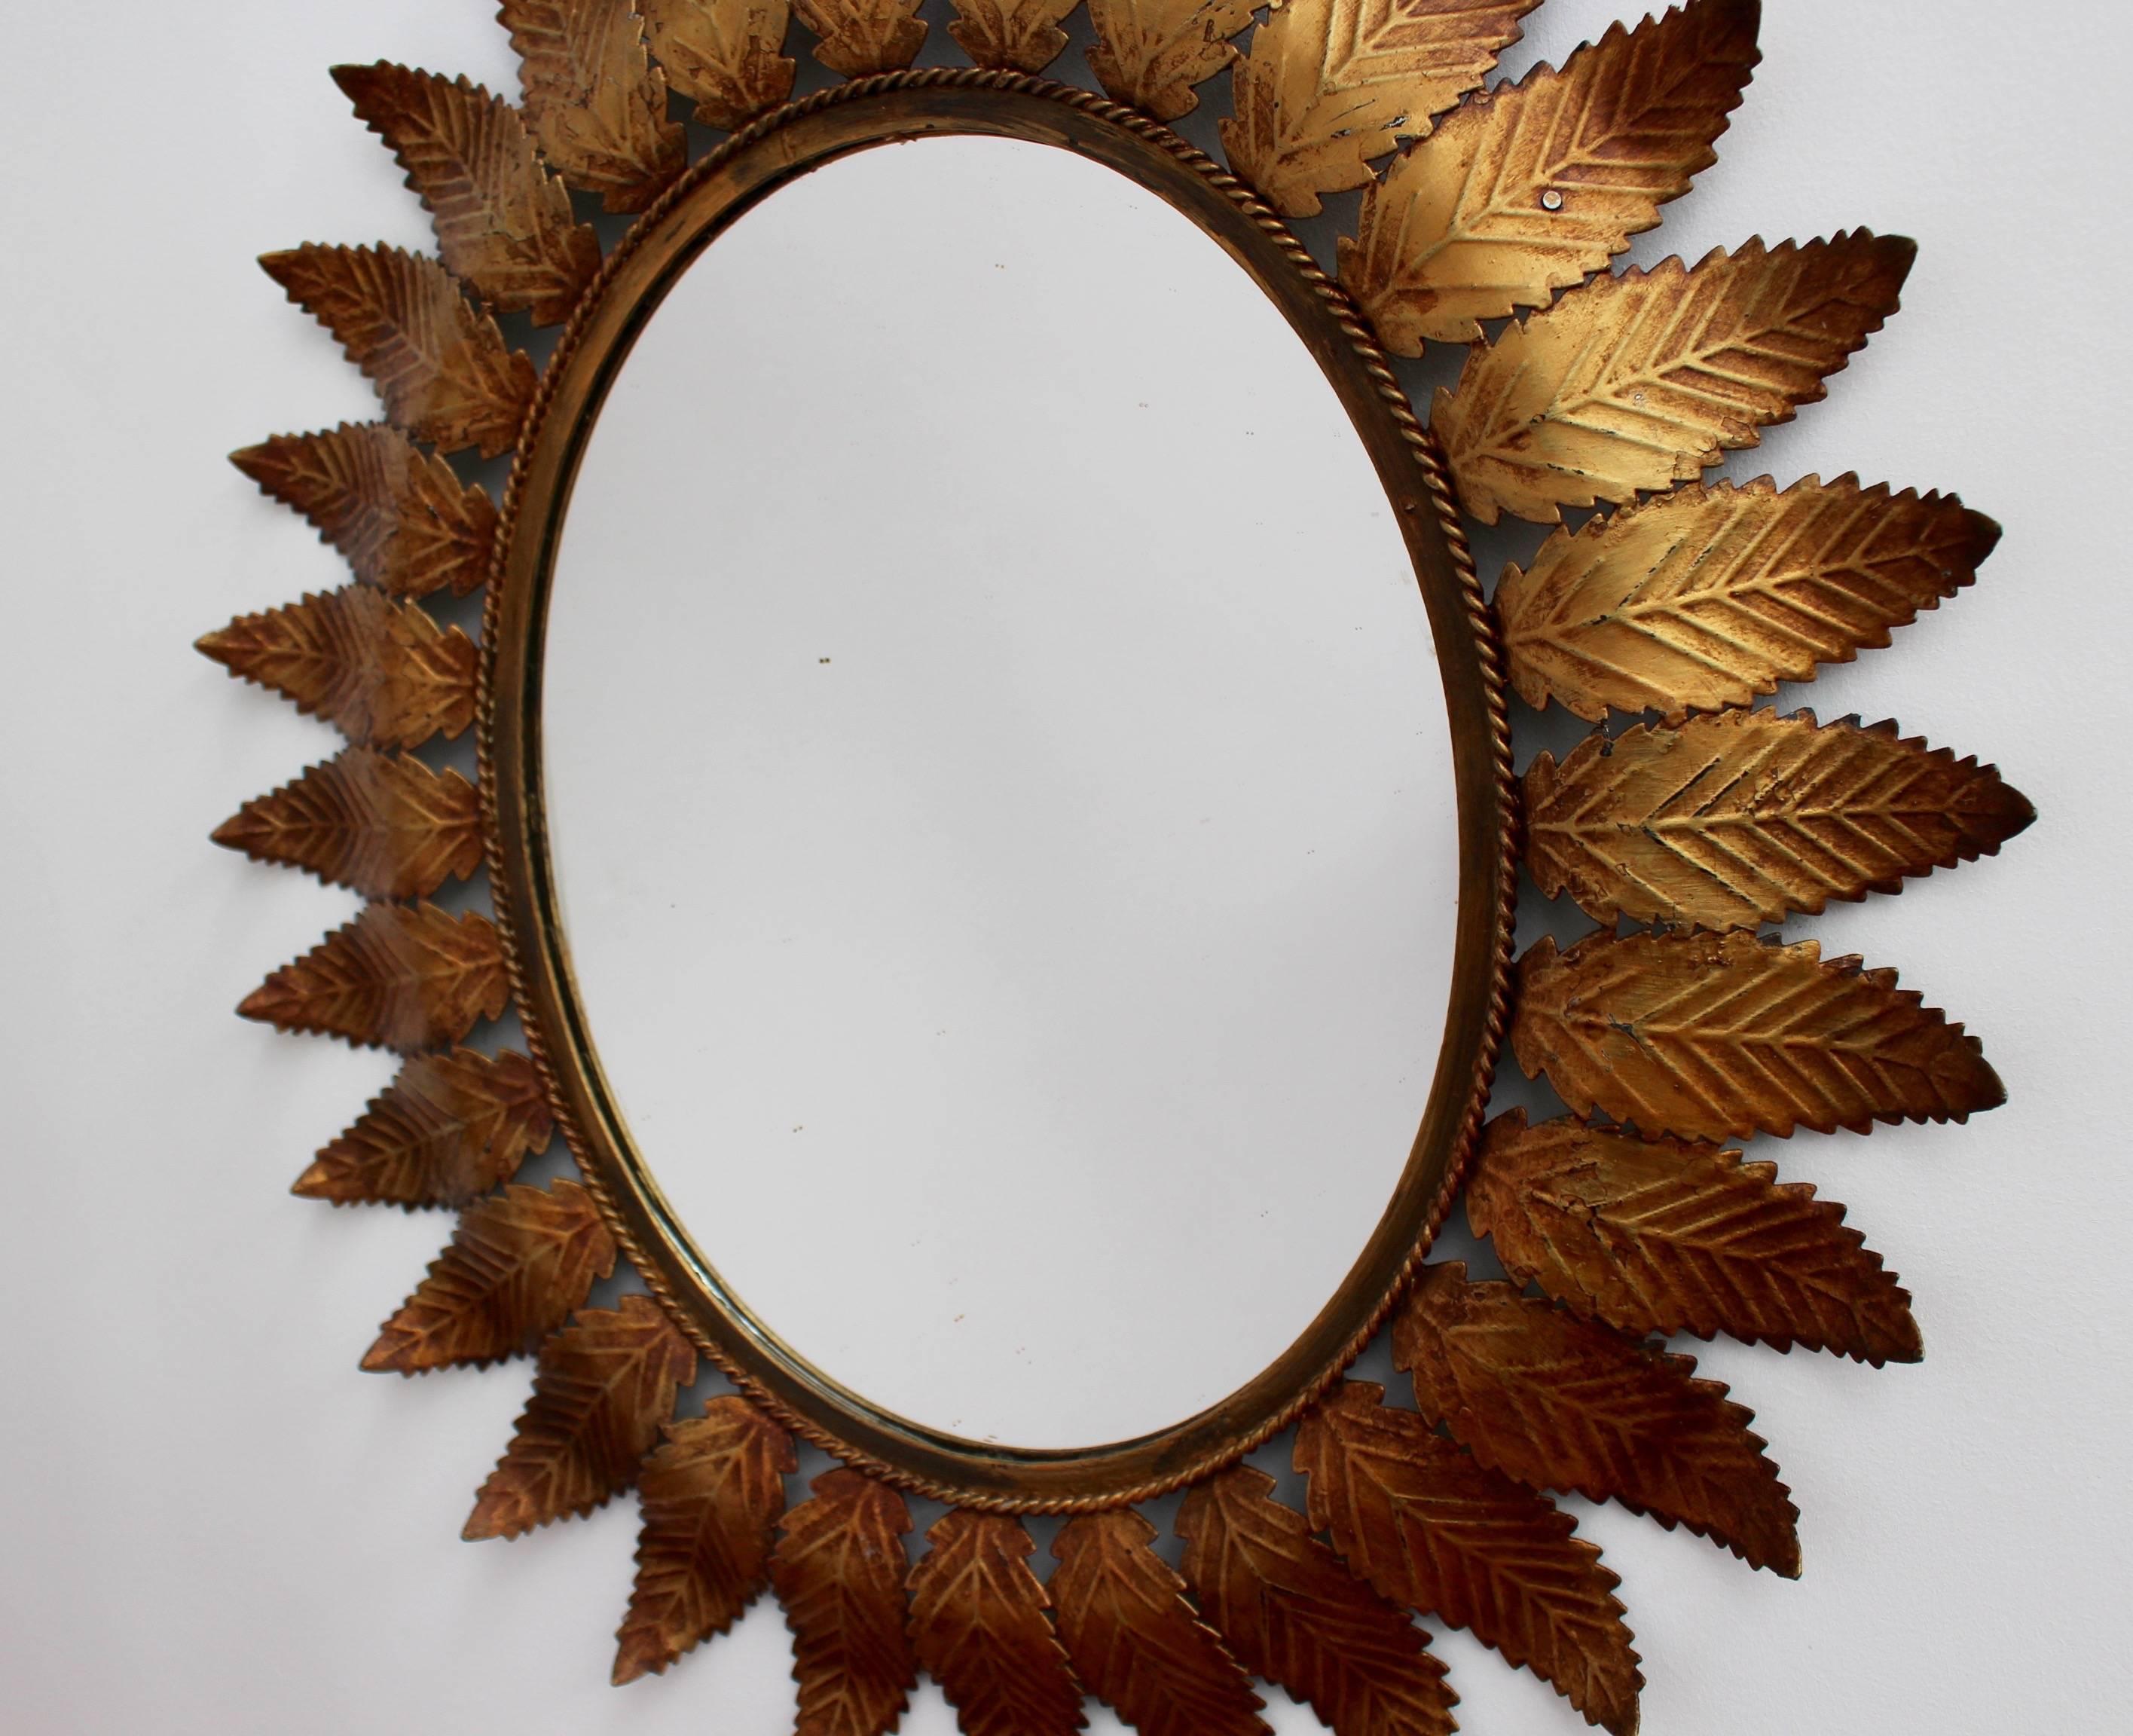 Spanish copper patina sunburst mirror, circa 1950s with leaf motif rays and rope-pattern mirror border. In good vintage condition commensurate with age and use. Some authentic age spots appear on mirror surface adding character while reflecting its